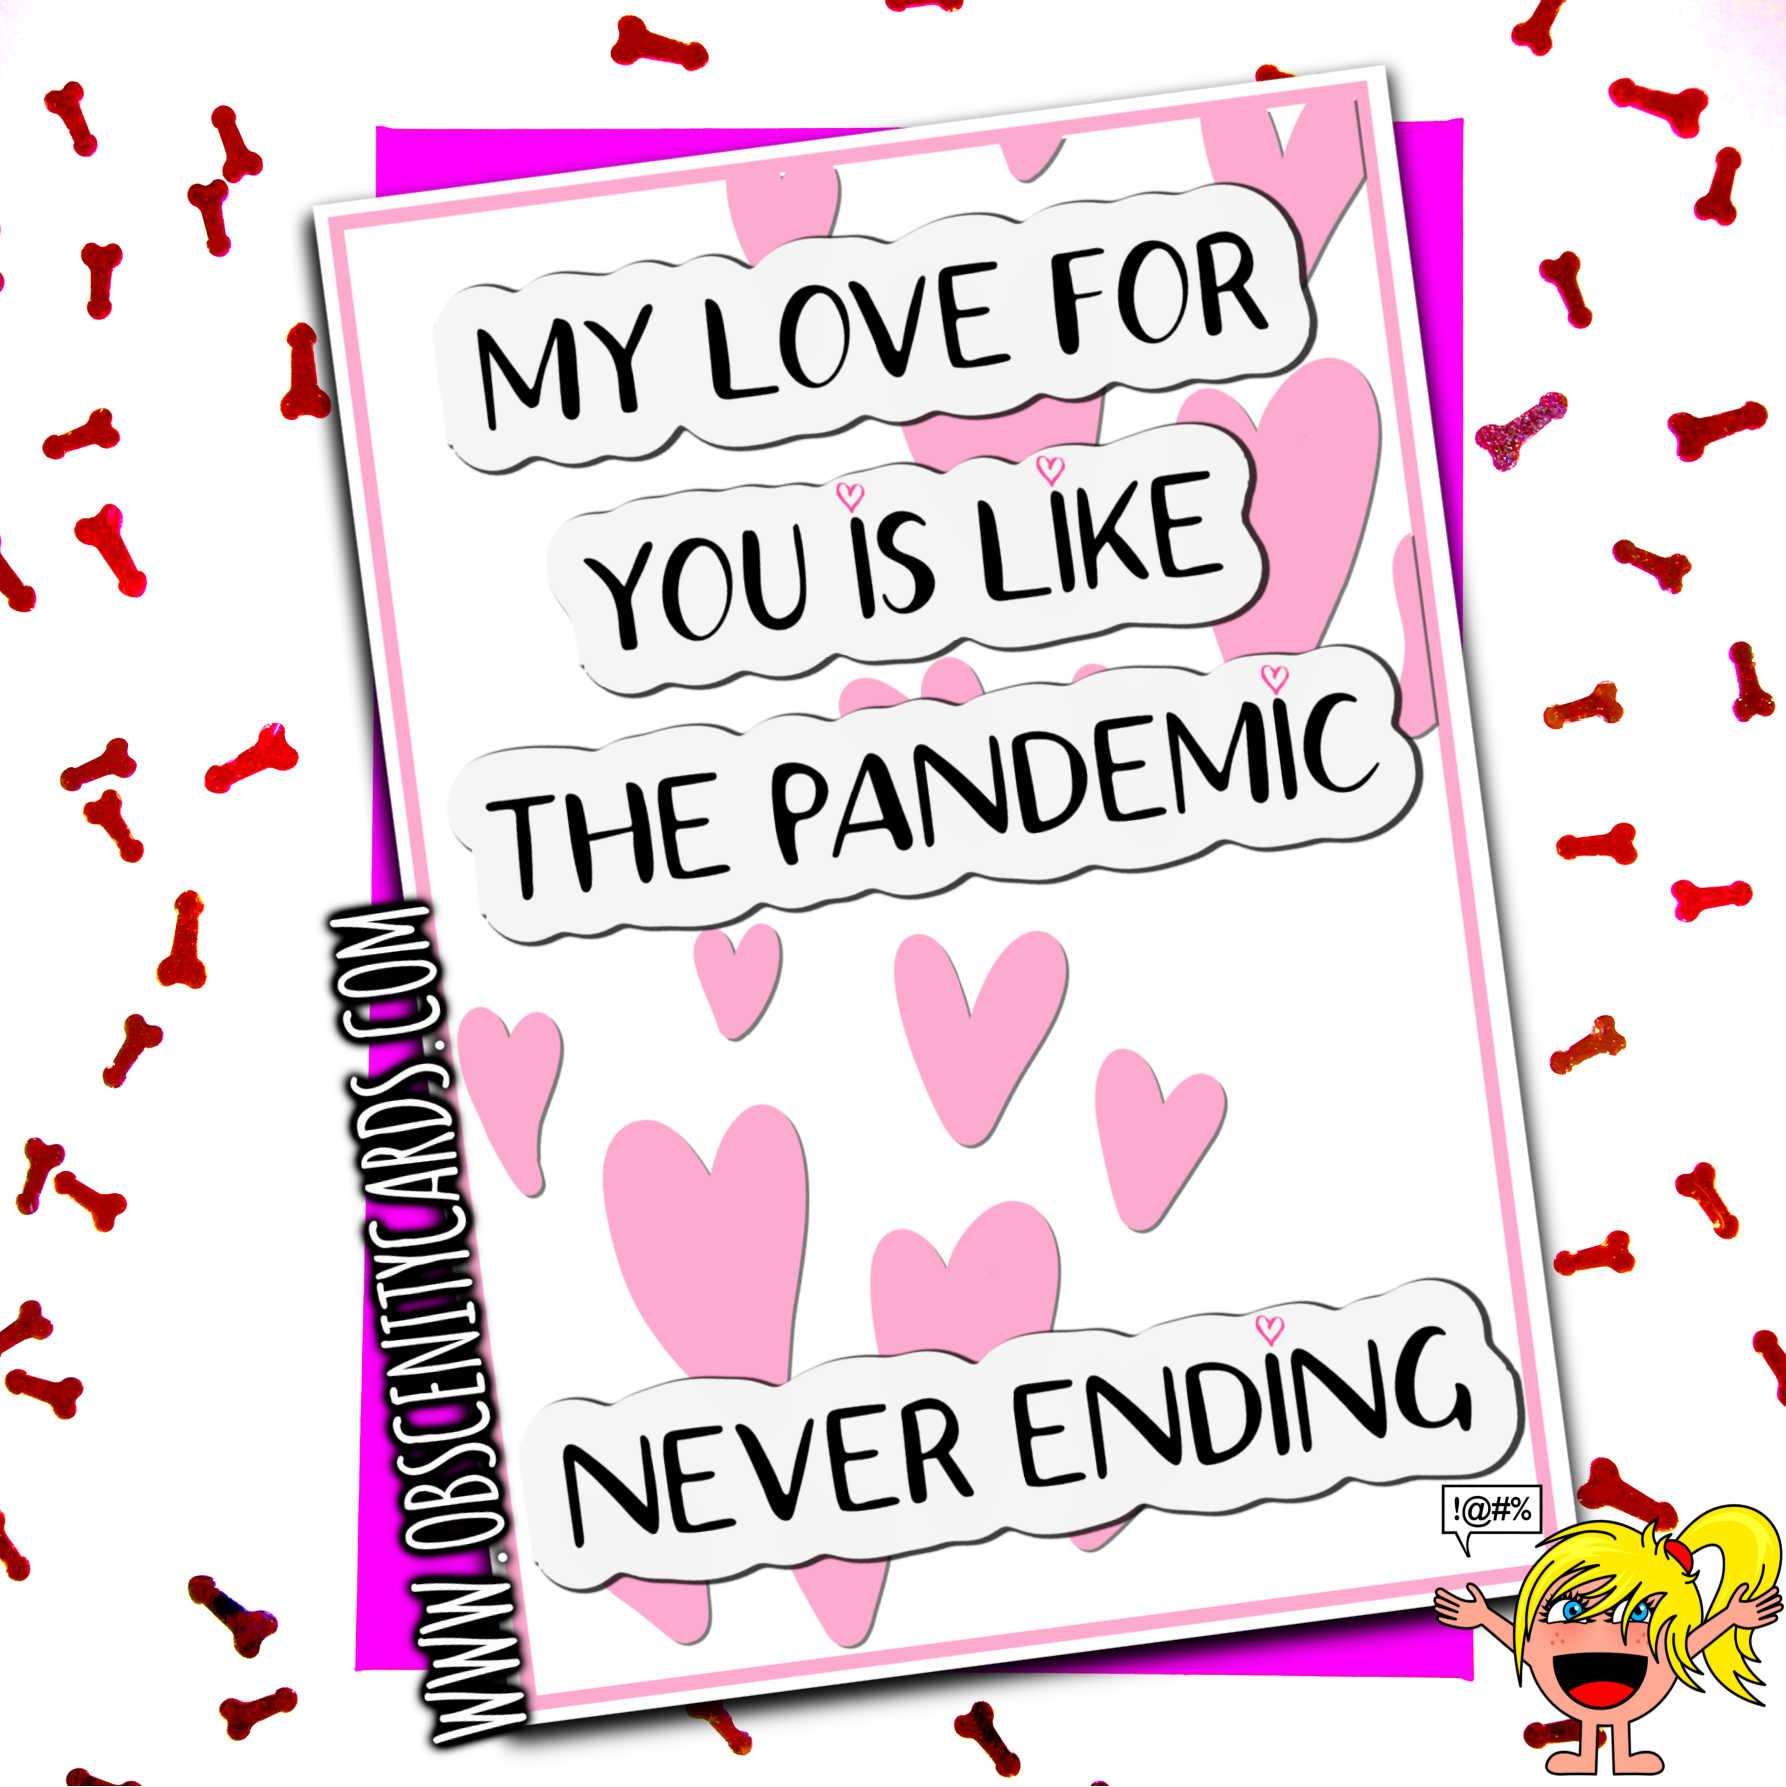 MY LOVE FOR YOU IS LIKE THE PANDEMIC. NEVER ENDING, VALENTINES / ANNIVERSARY CARD